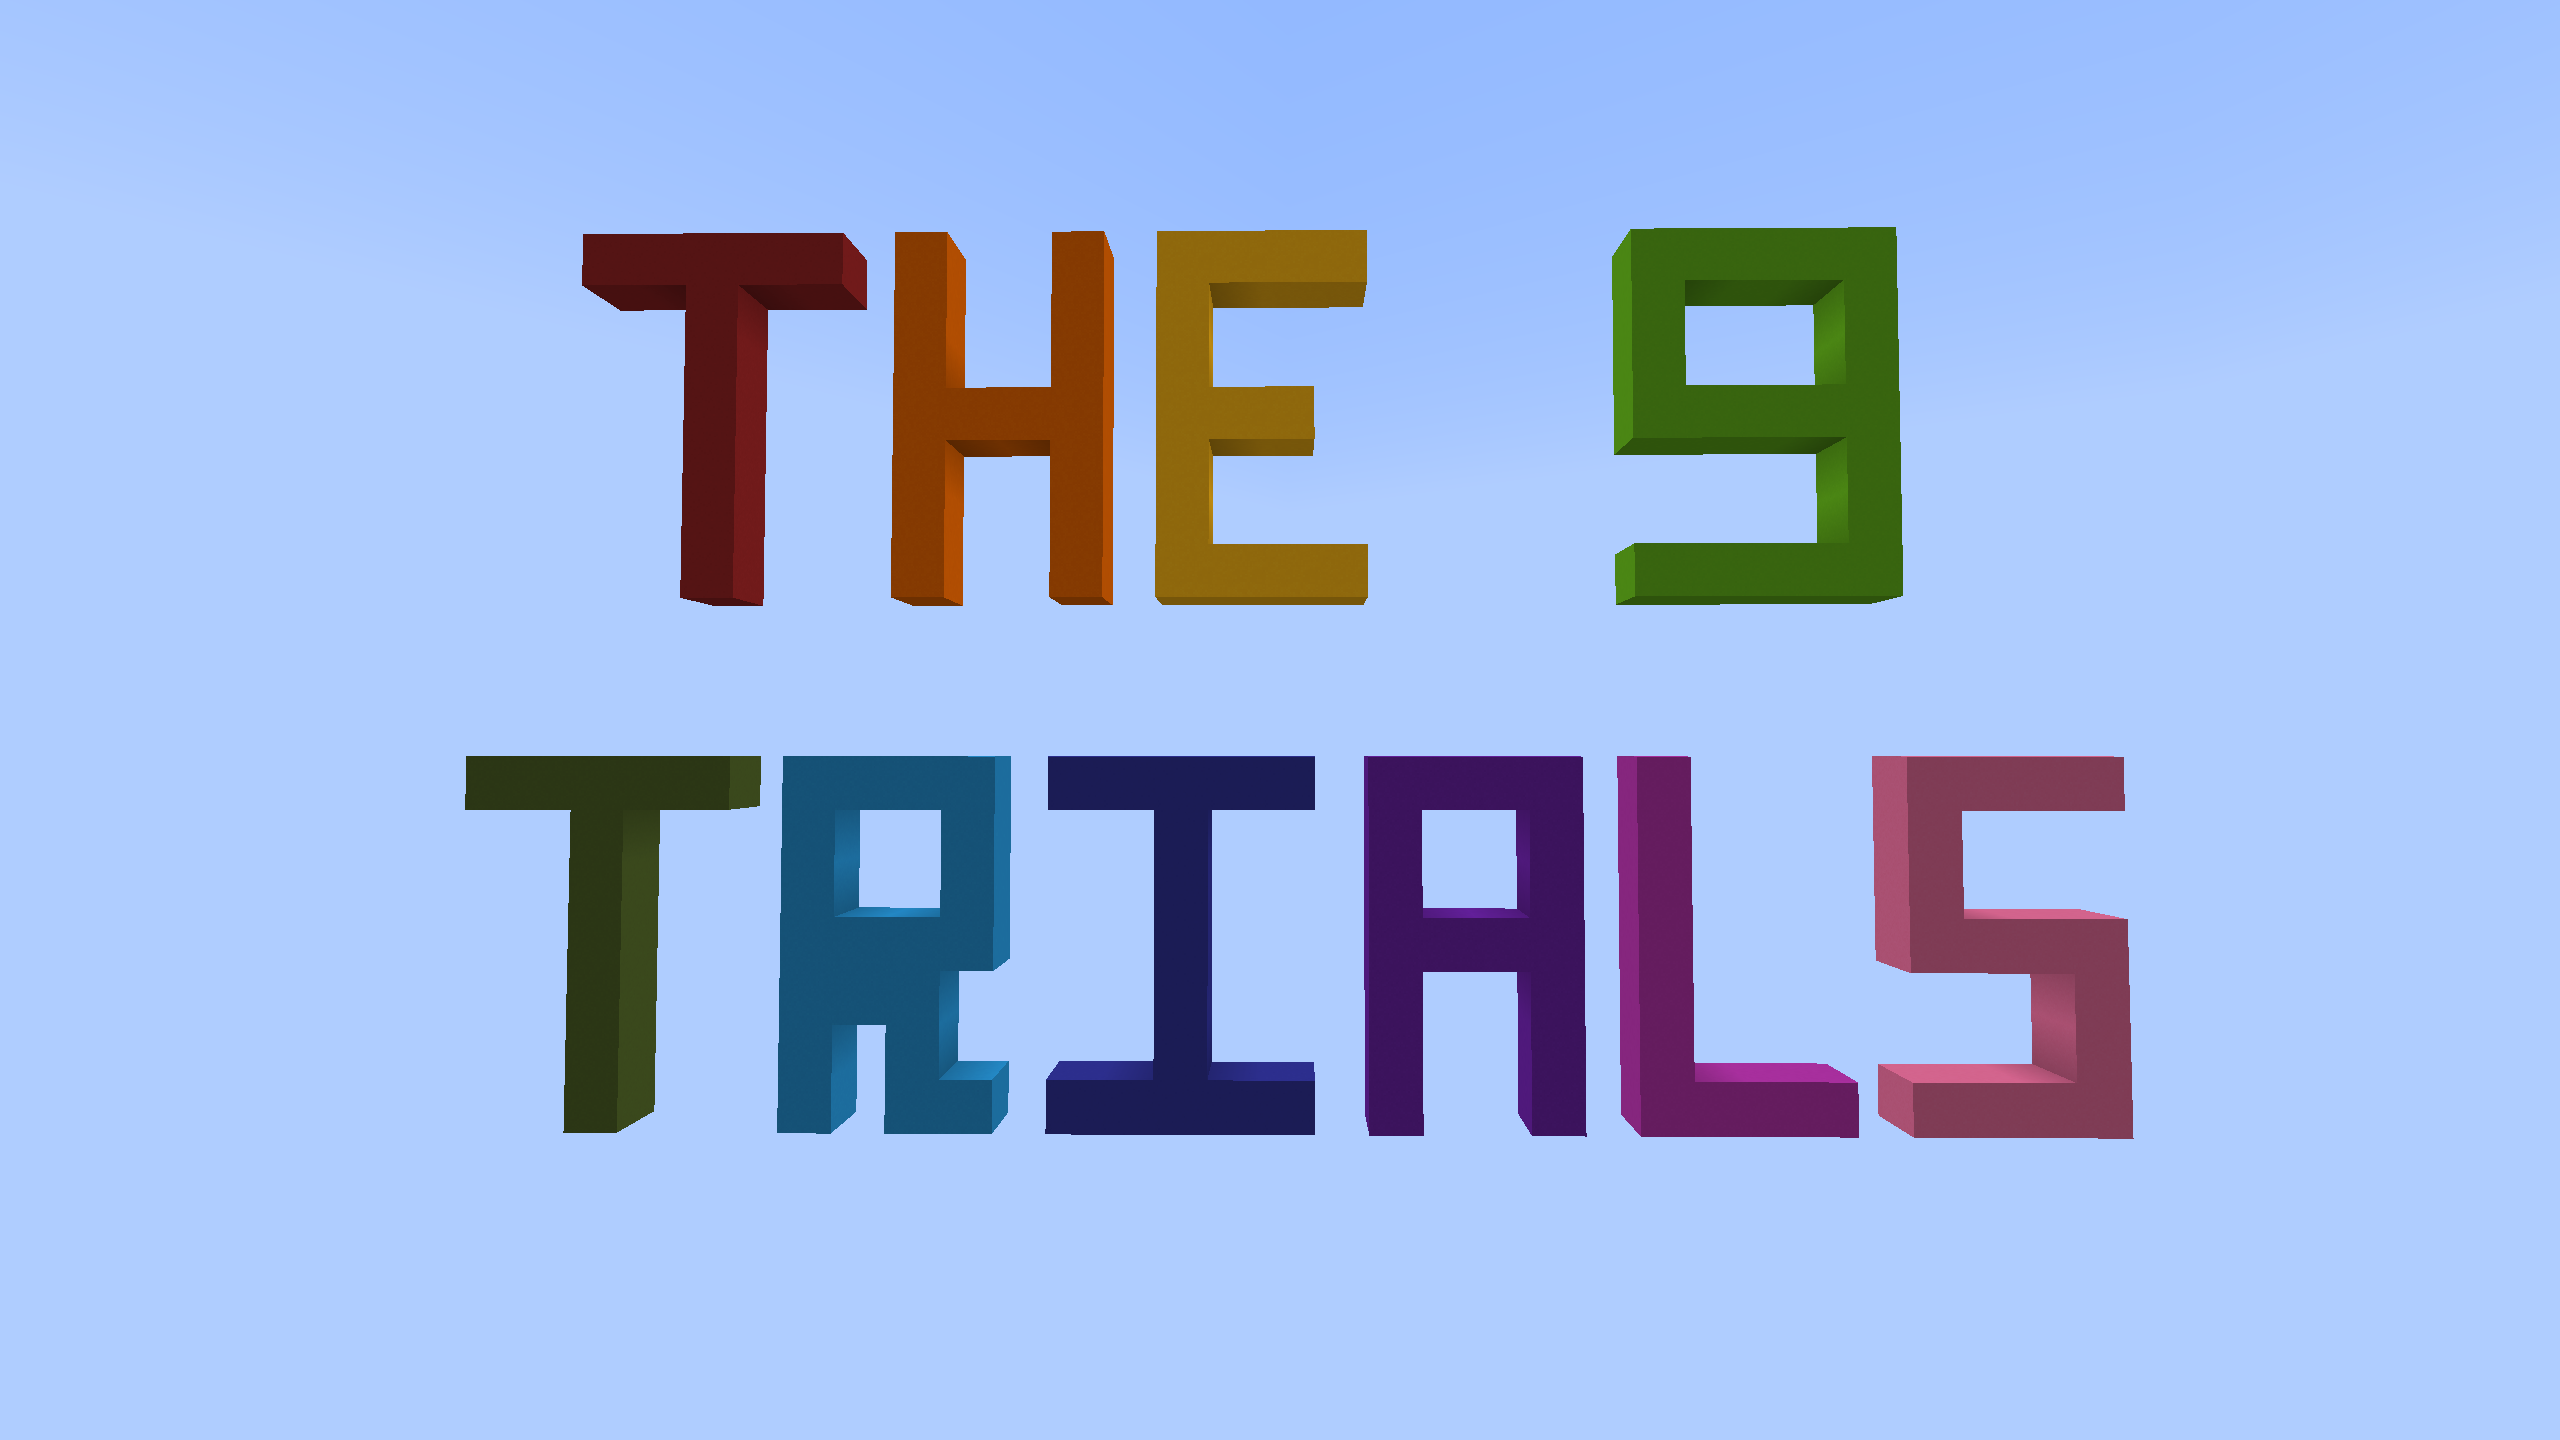 Download THE 9 TRIALS for Minecraft 1.16.5